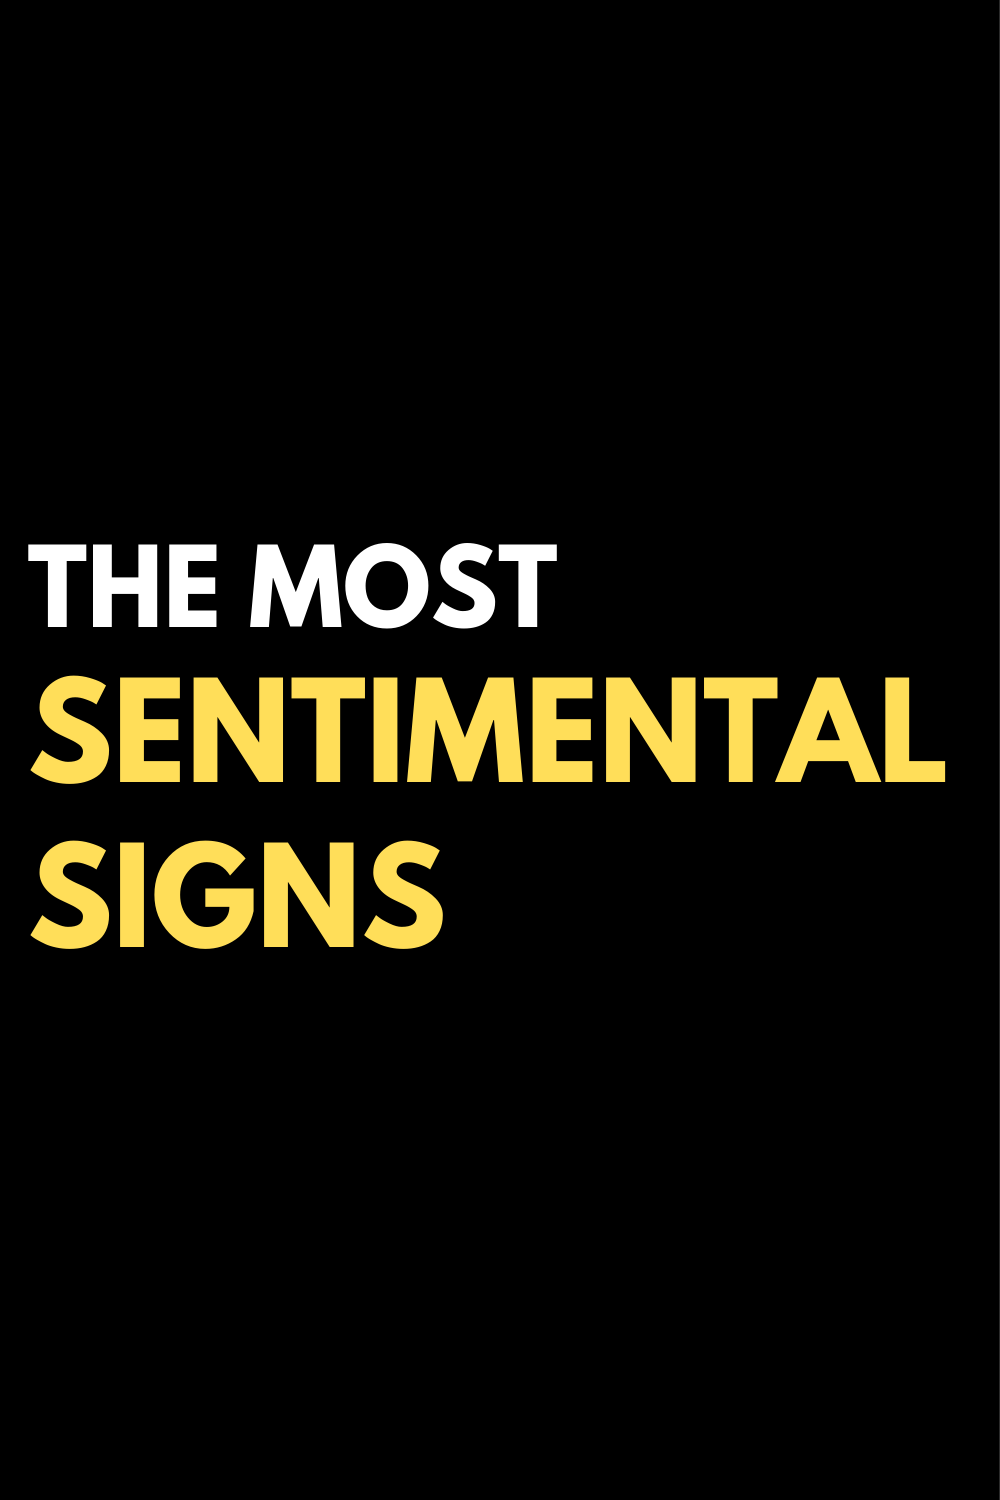 The most sentimental signs